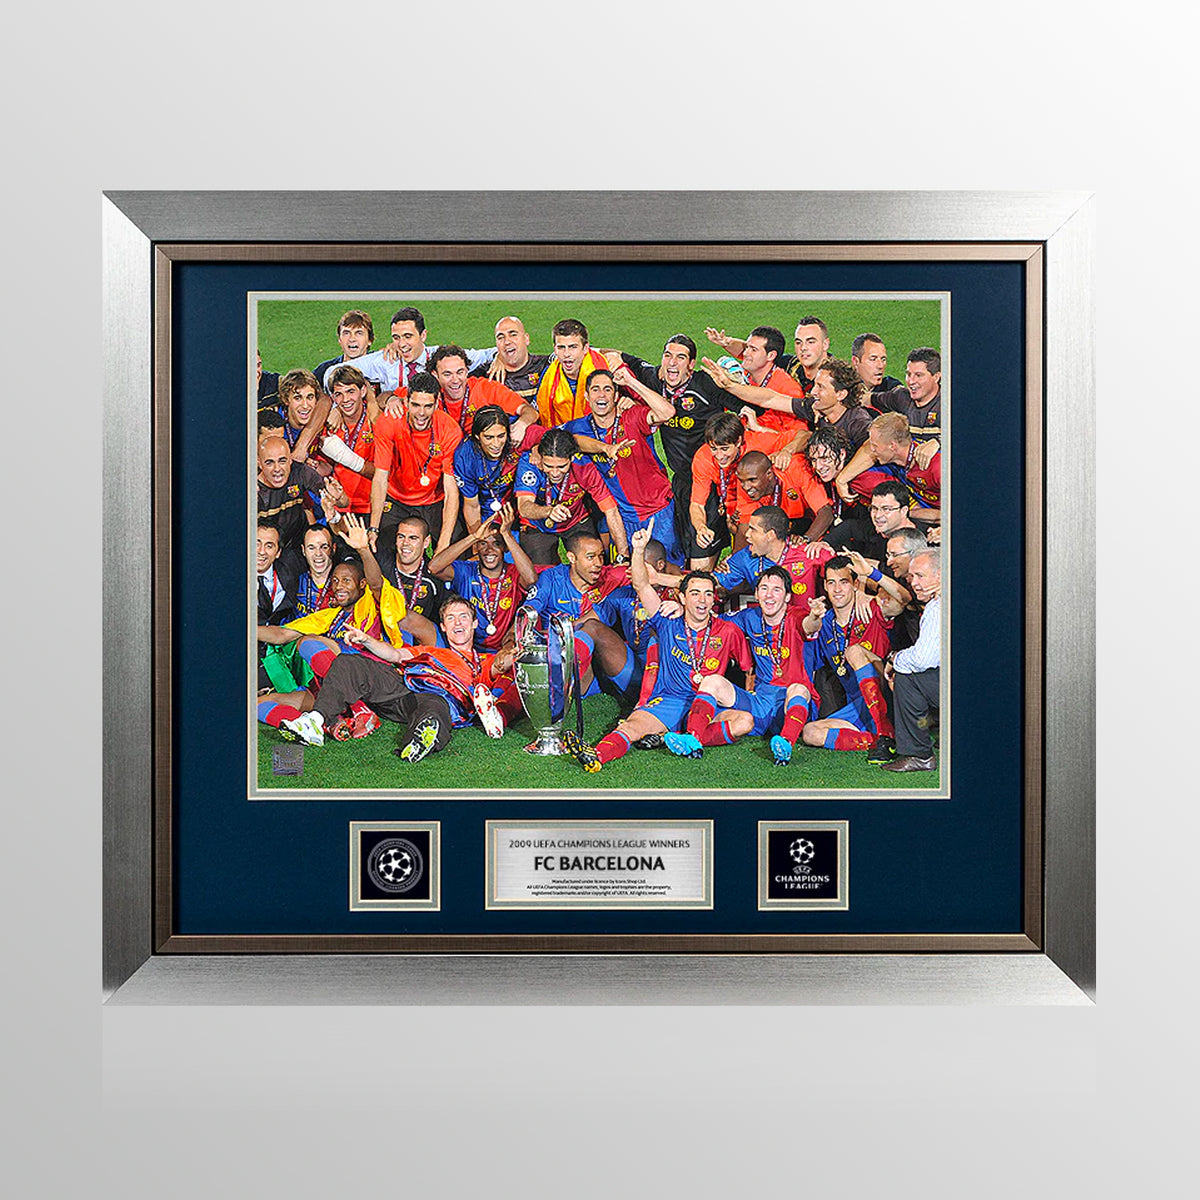 UNSIGNED FC Barcelona Official UEFA Champions League Framed Photo: 2009 Winners UEFA Club Competitions Online Store